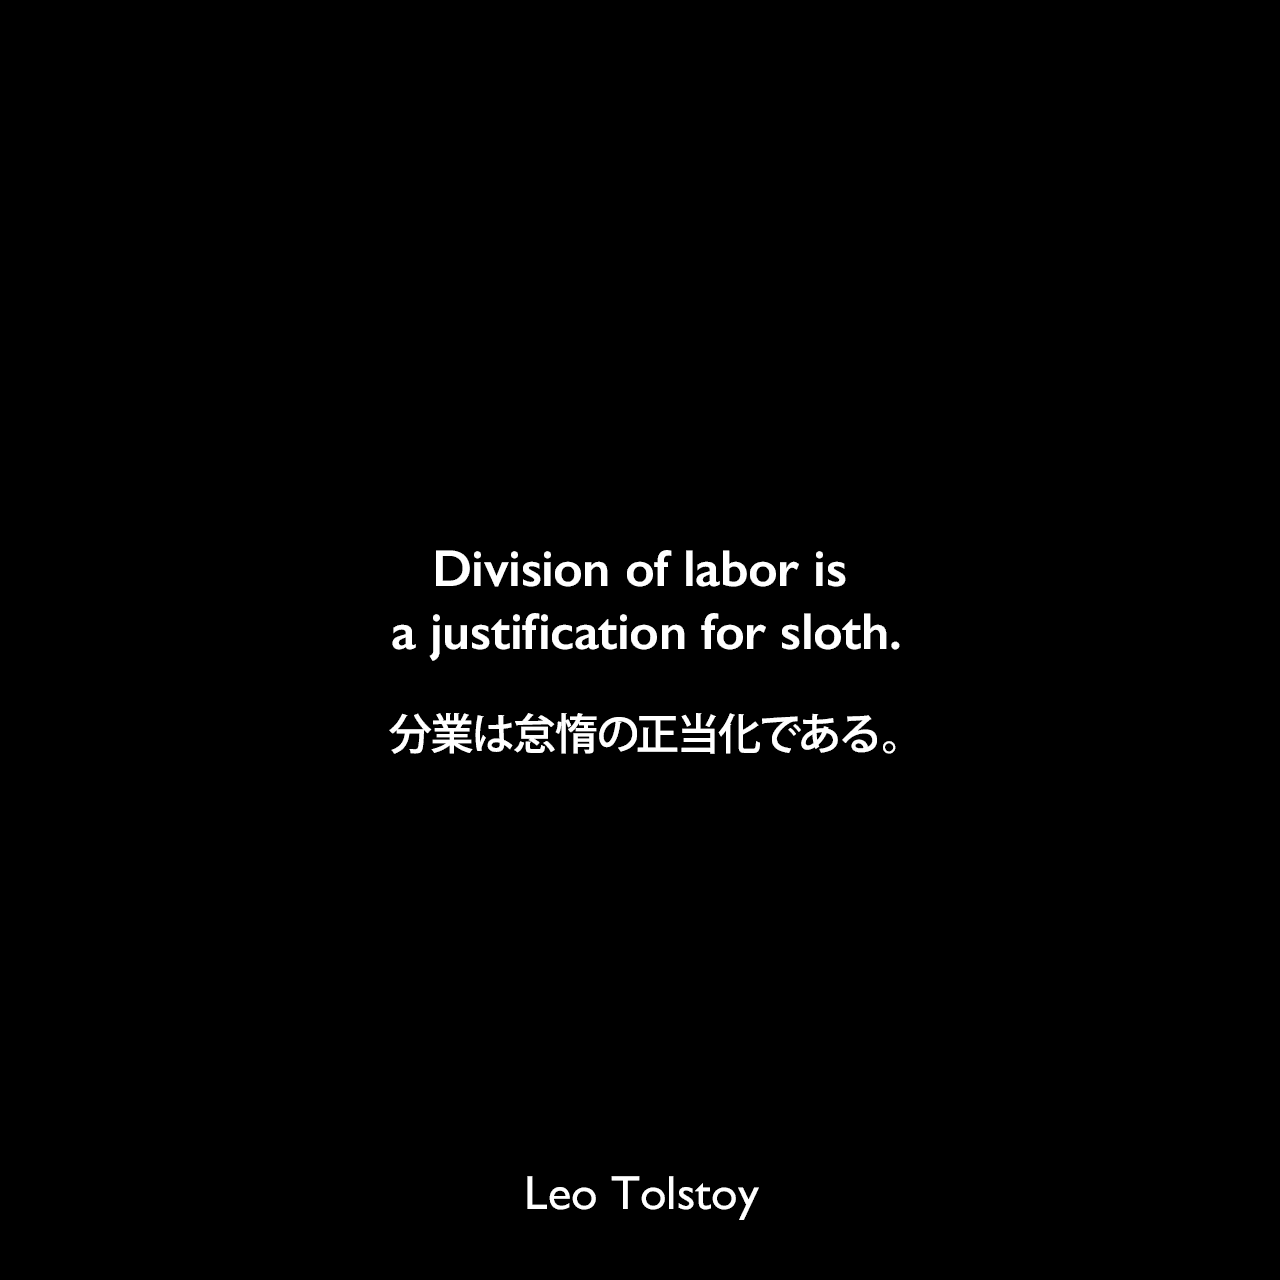 Division of labor is a justification for sloth.分業は怠惰の正当化である。- トルストイによる本「The Pathway of Life」よりLeo Tolstoy